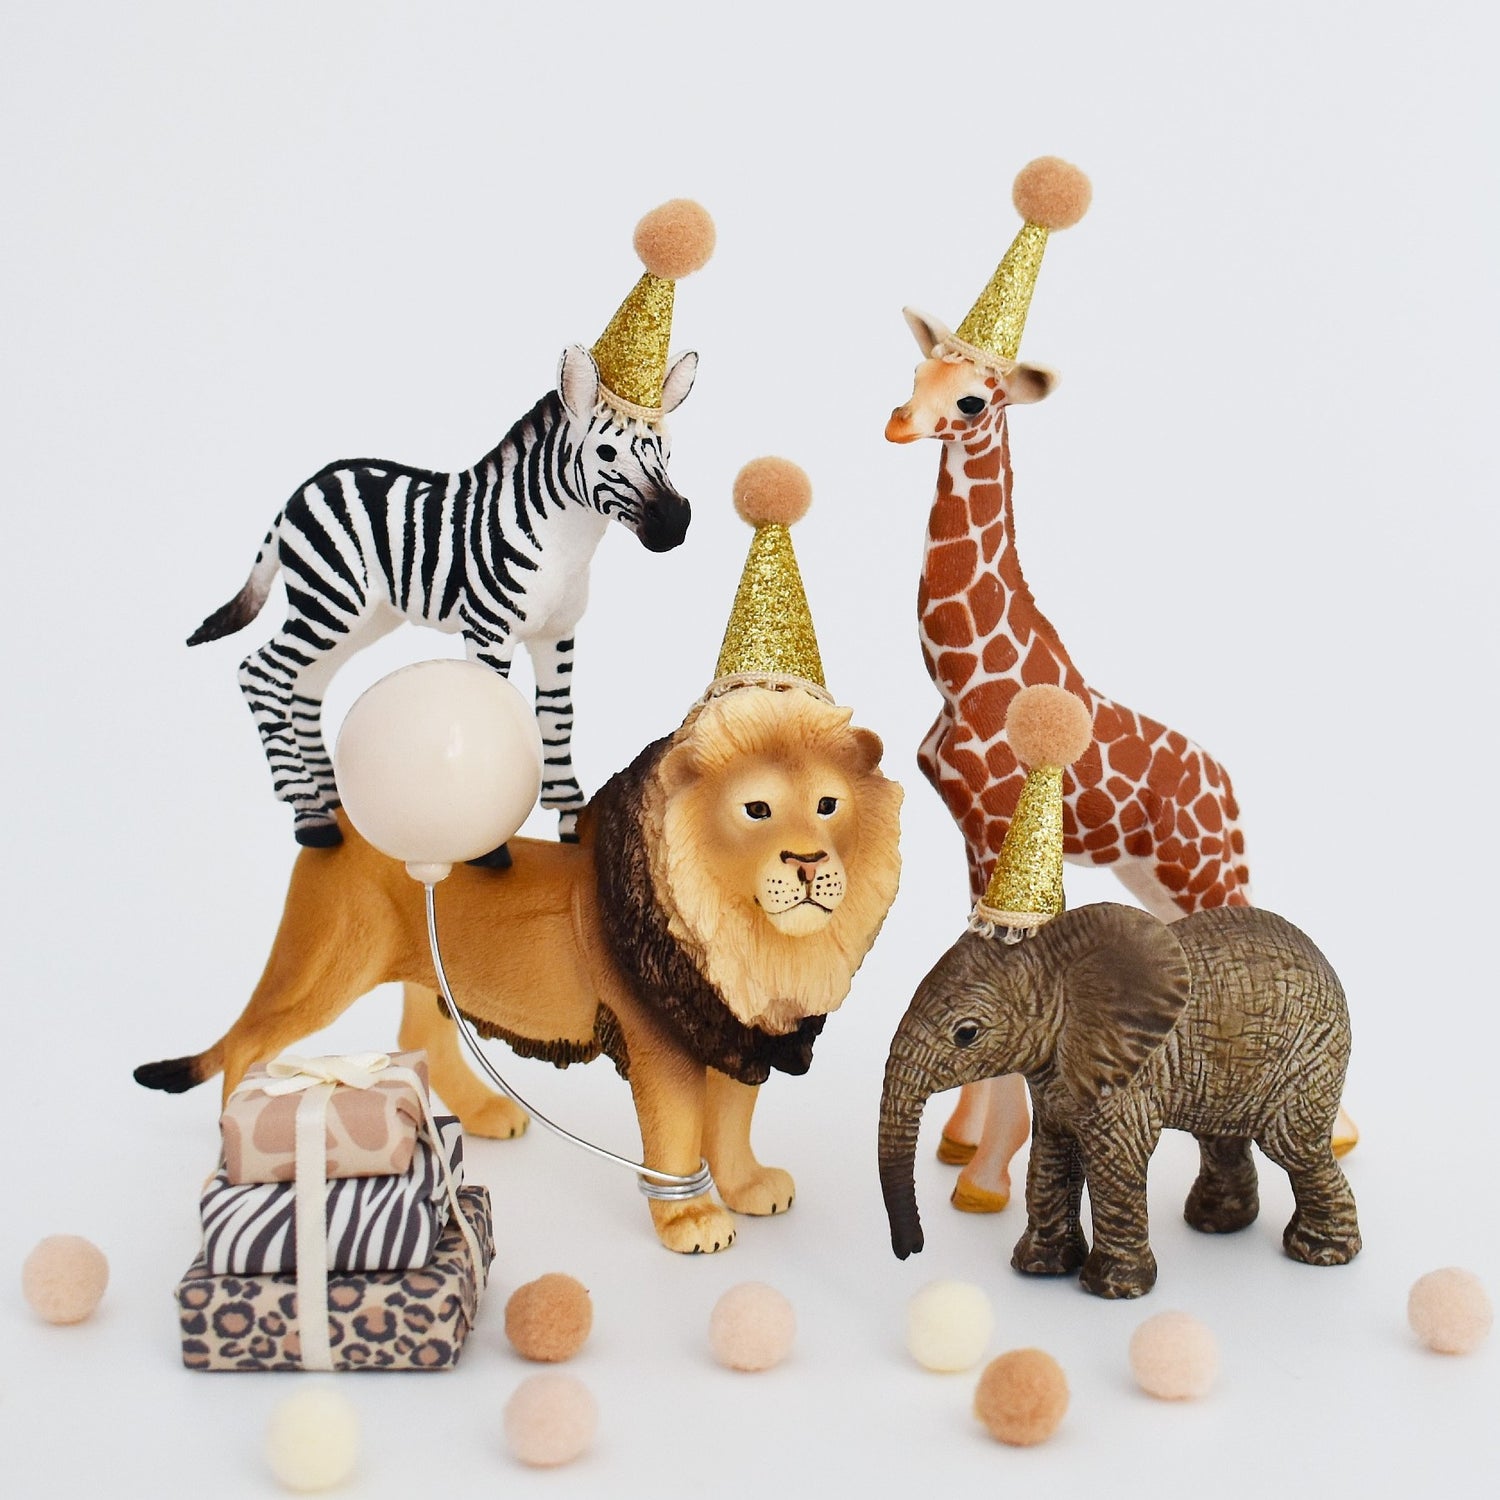 Animal Cake Toppers